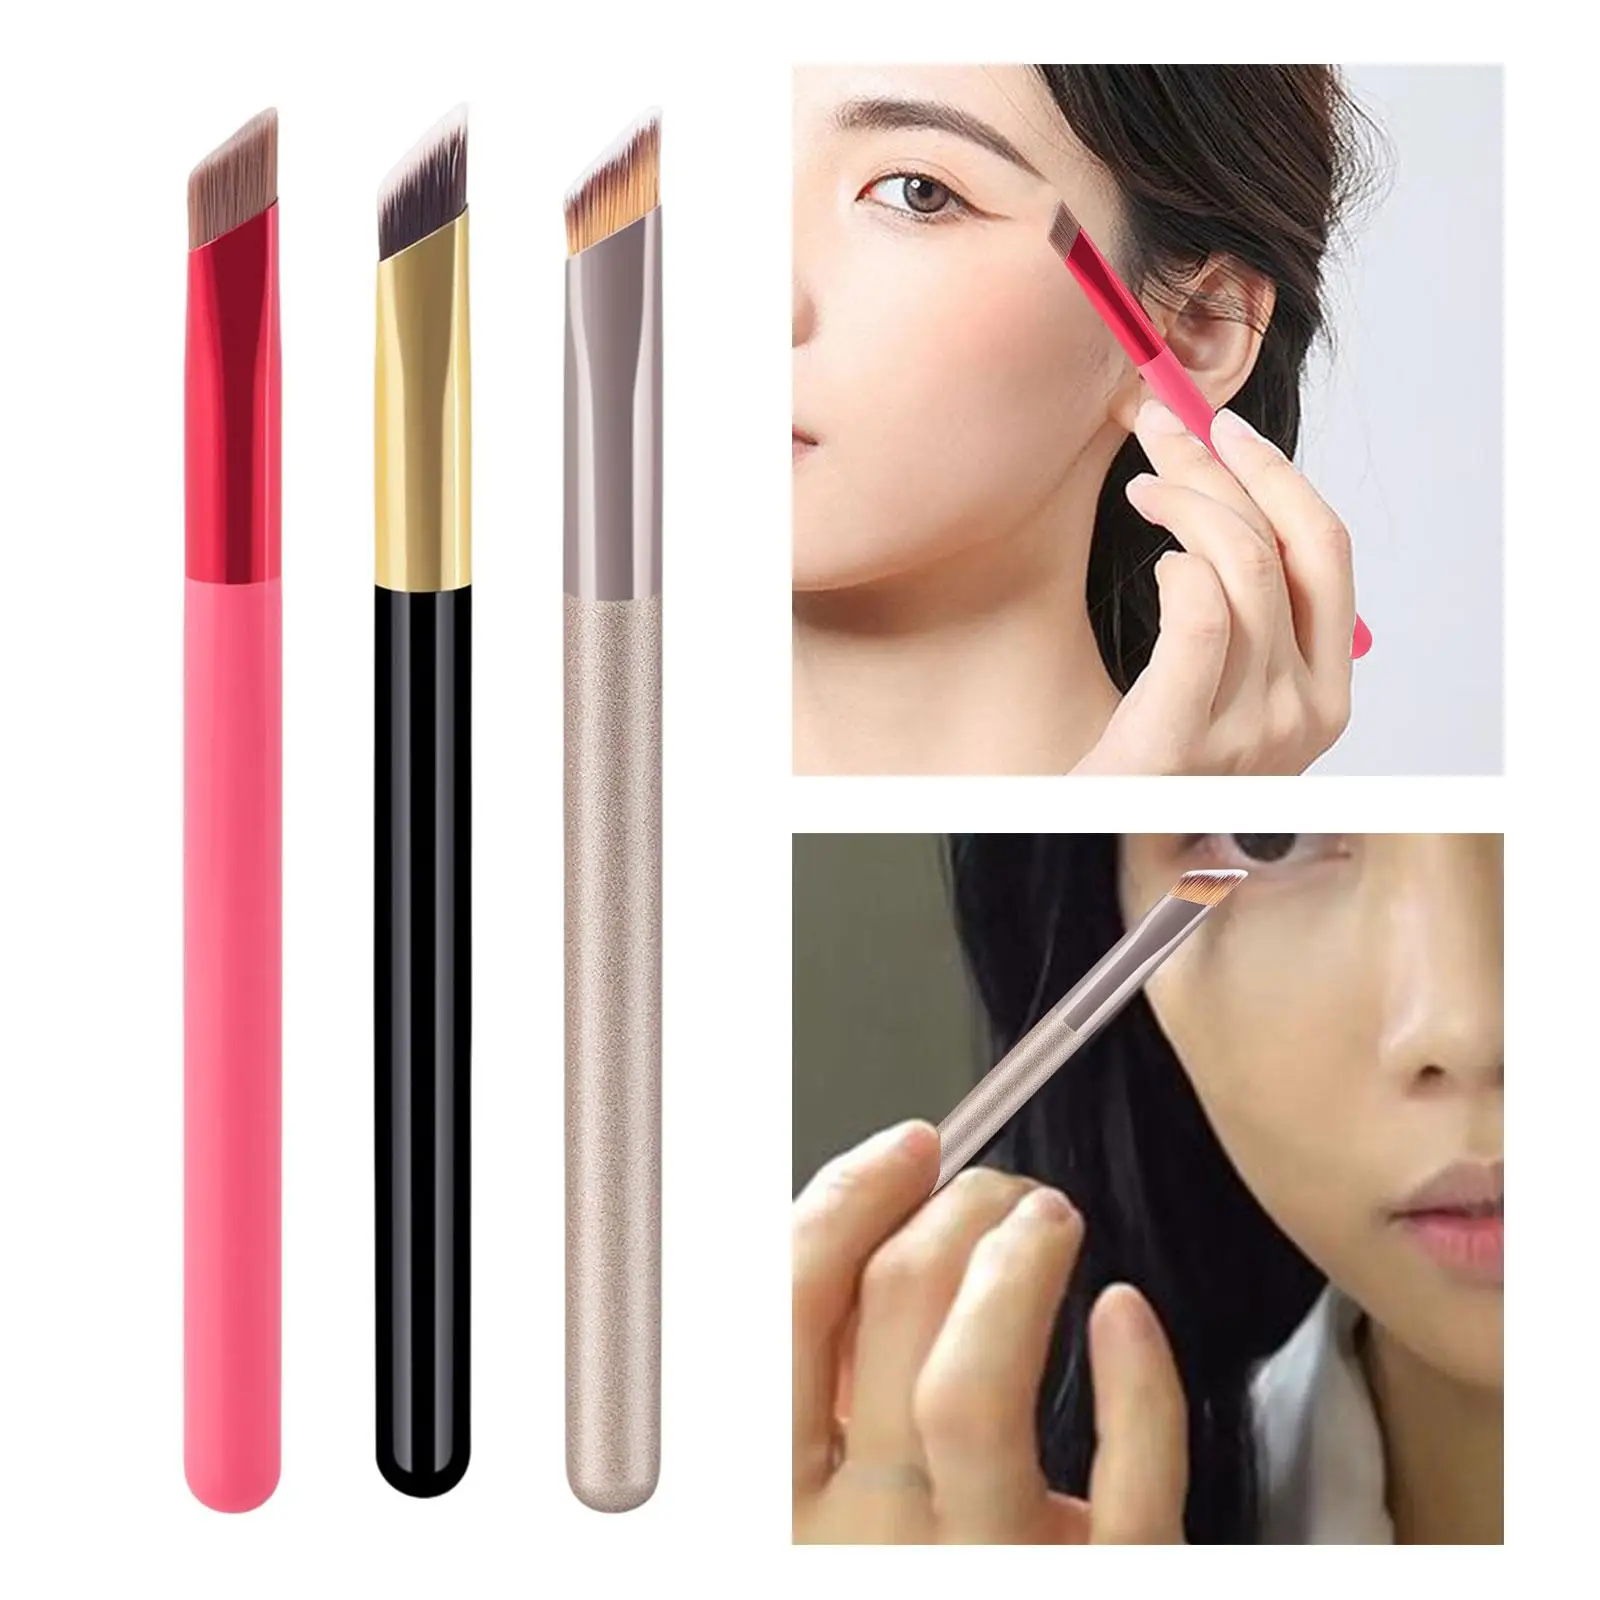 Professional Brow Brush Home Salon Use Smooth Portable Soft Multipurpose Makeup Brush for Girls